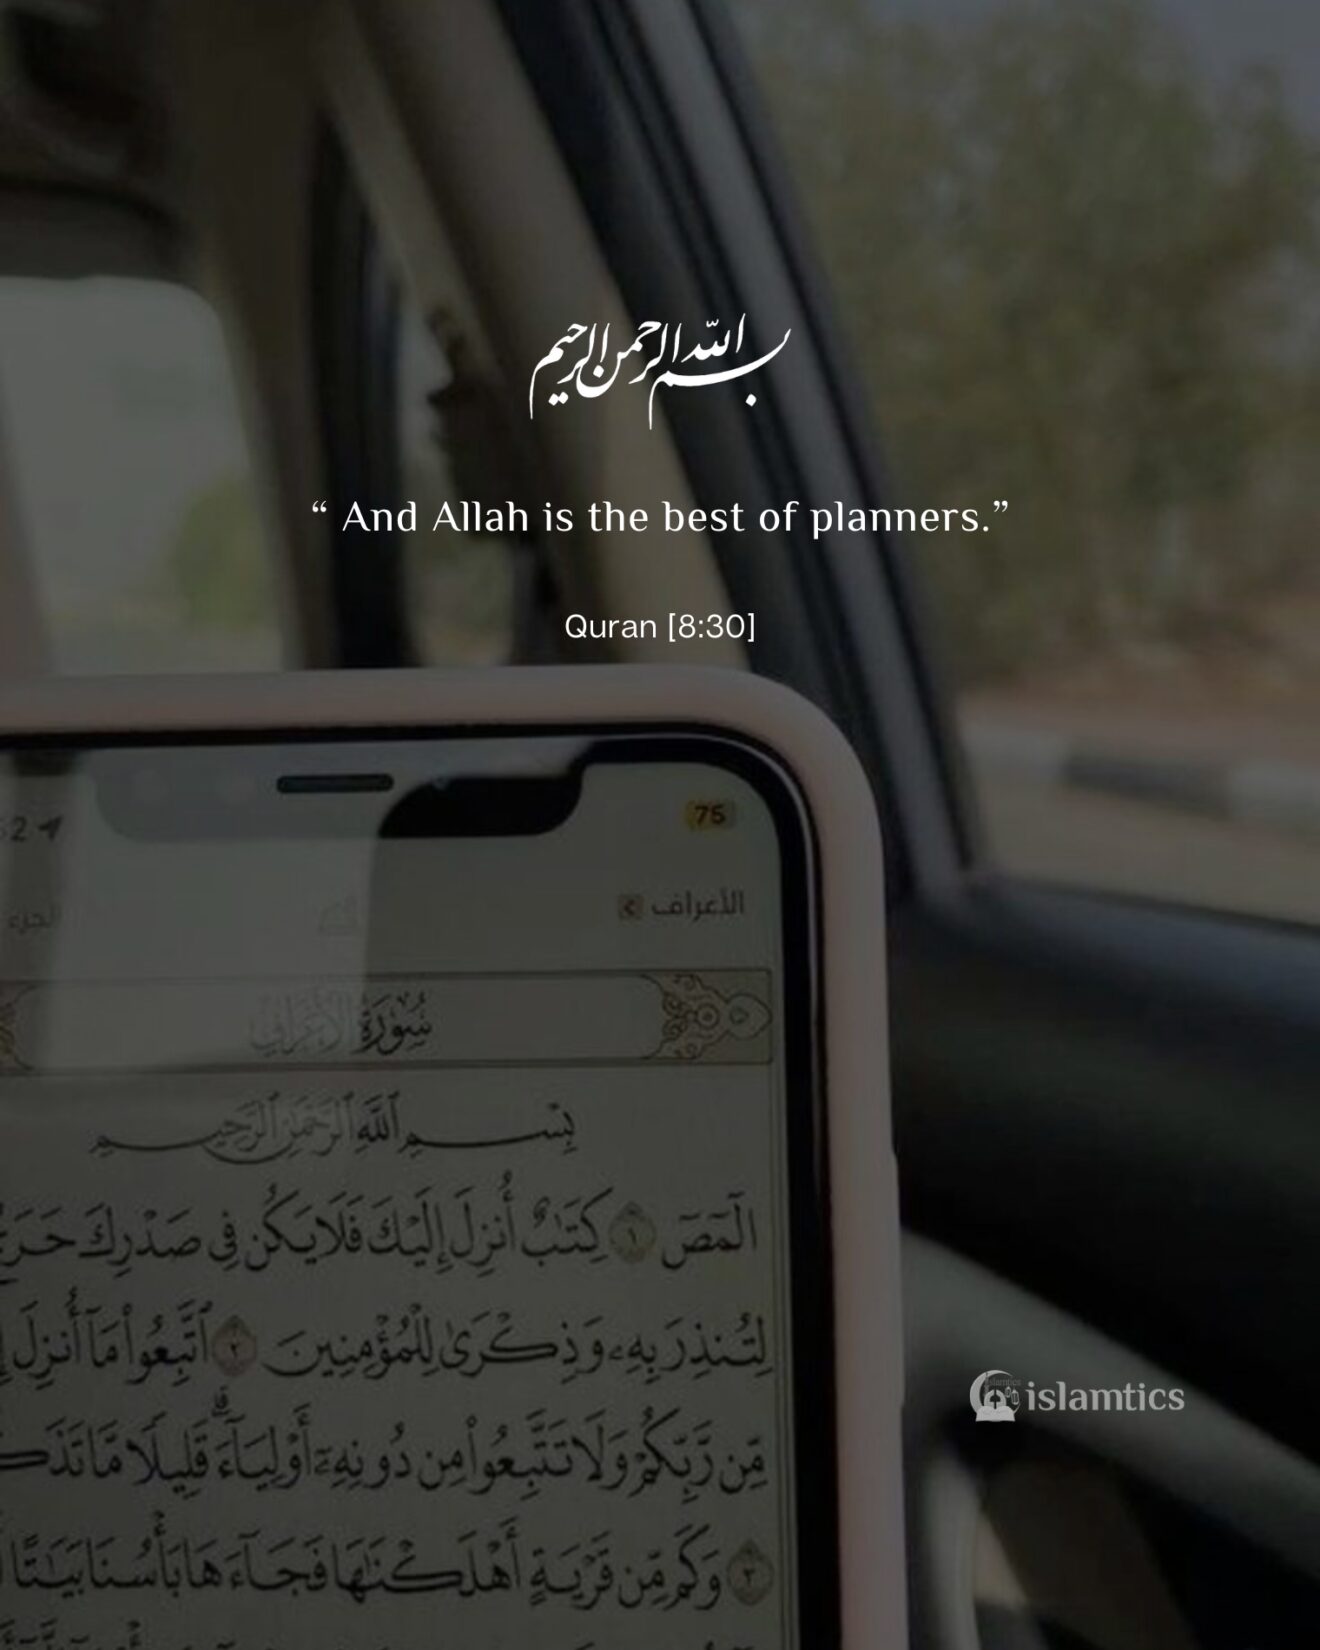 “ And Allah is the best of planners.”